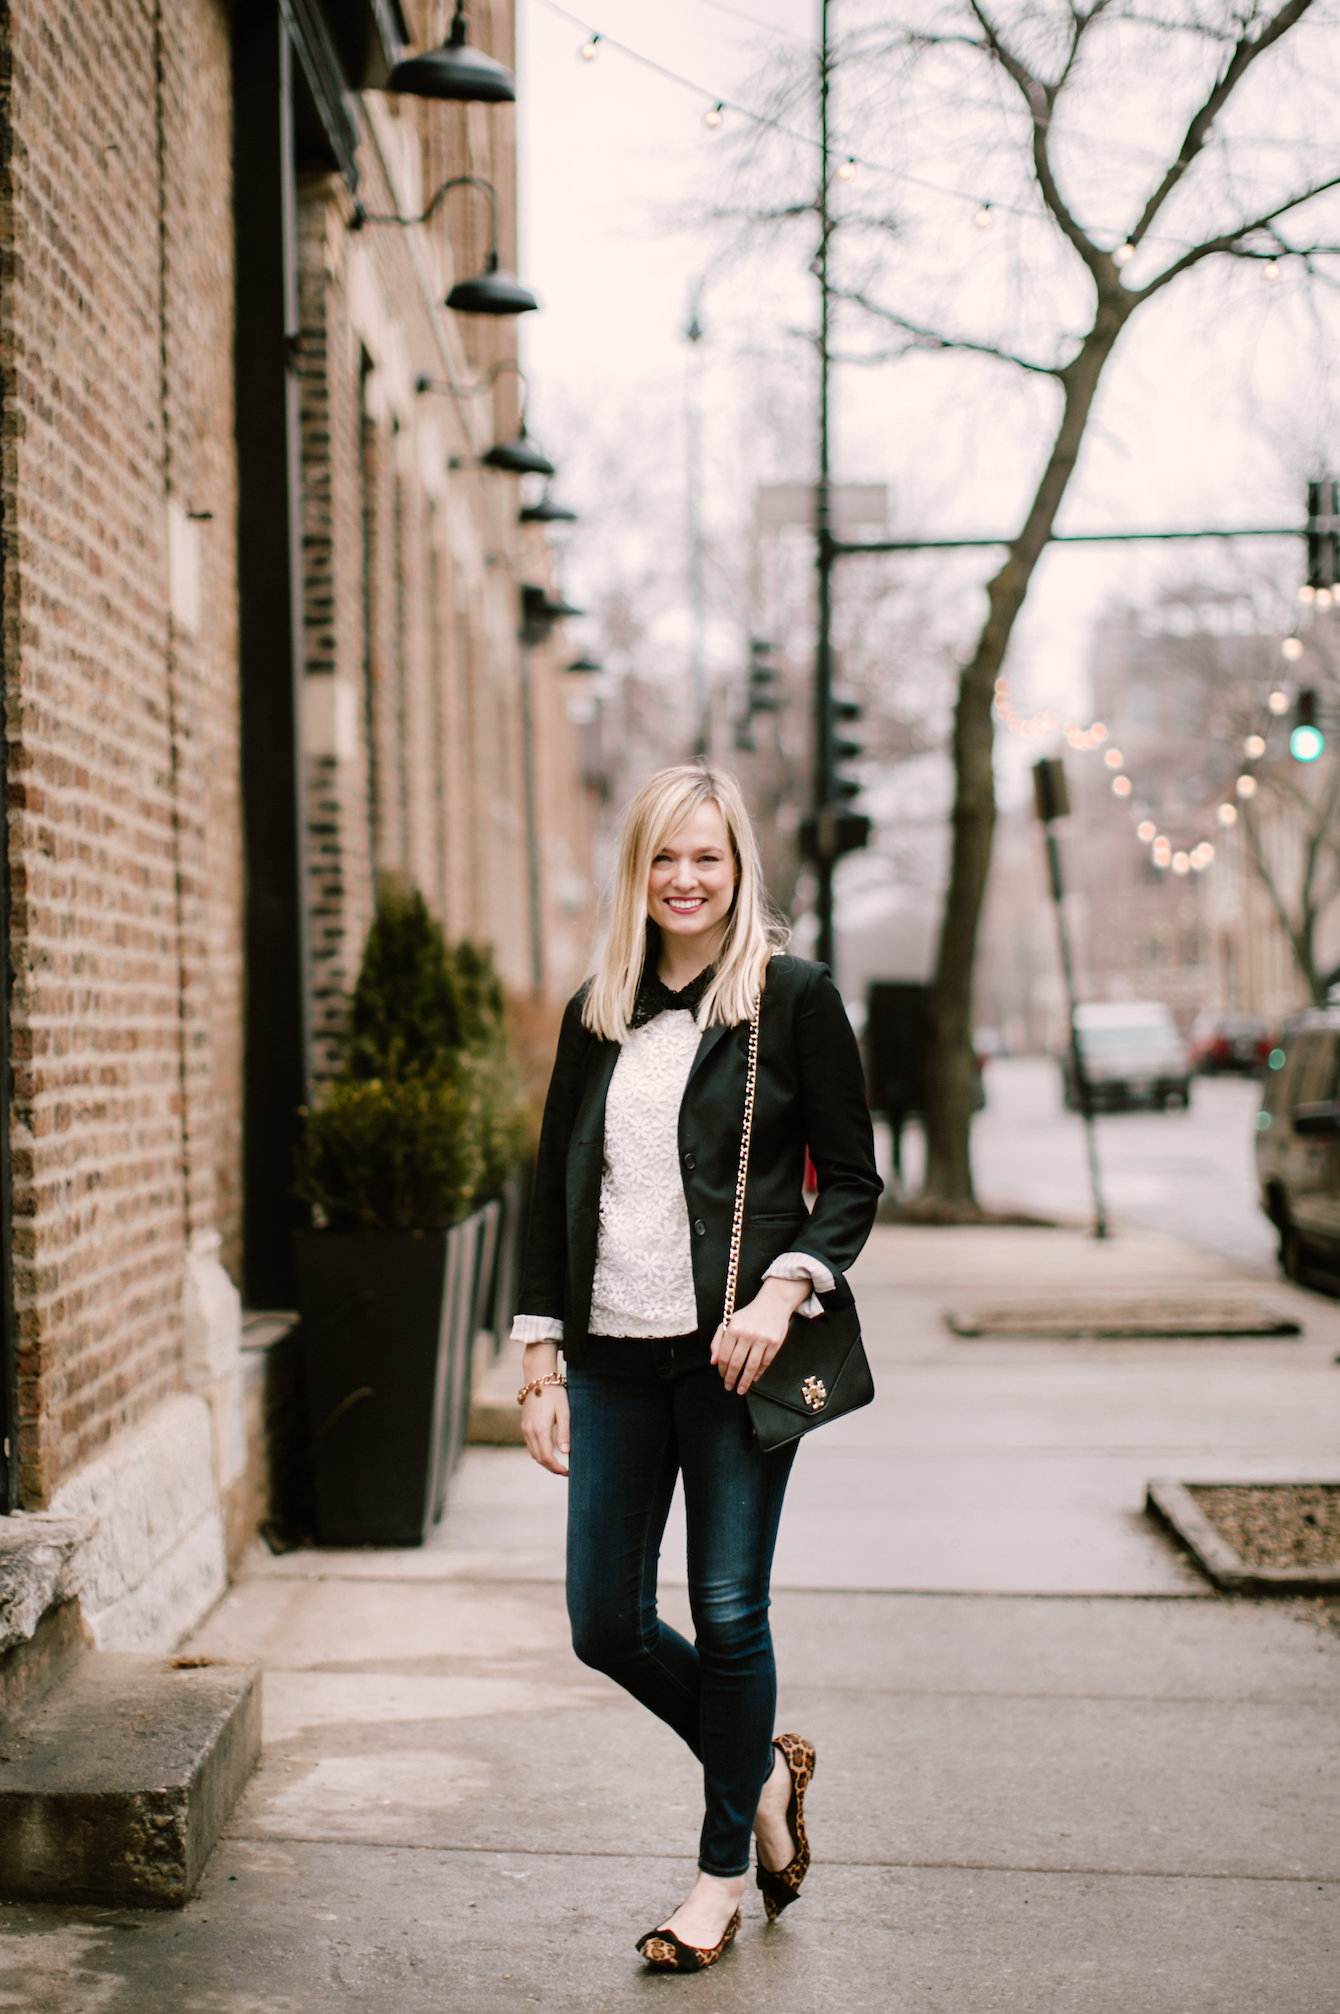 Workwear Wednesday: Casual Day Wear | Charmingly Styled